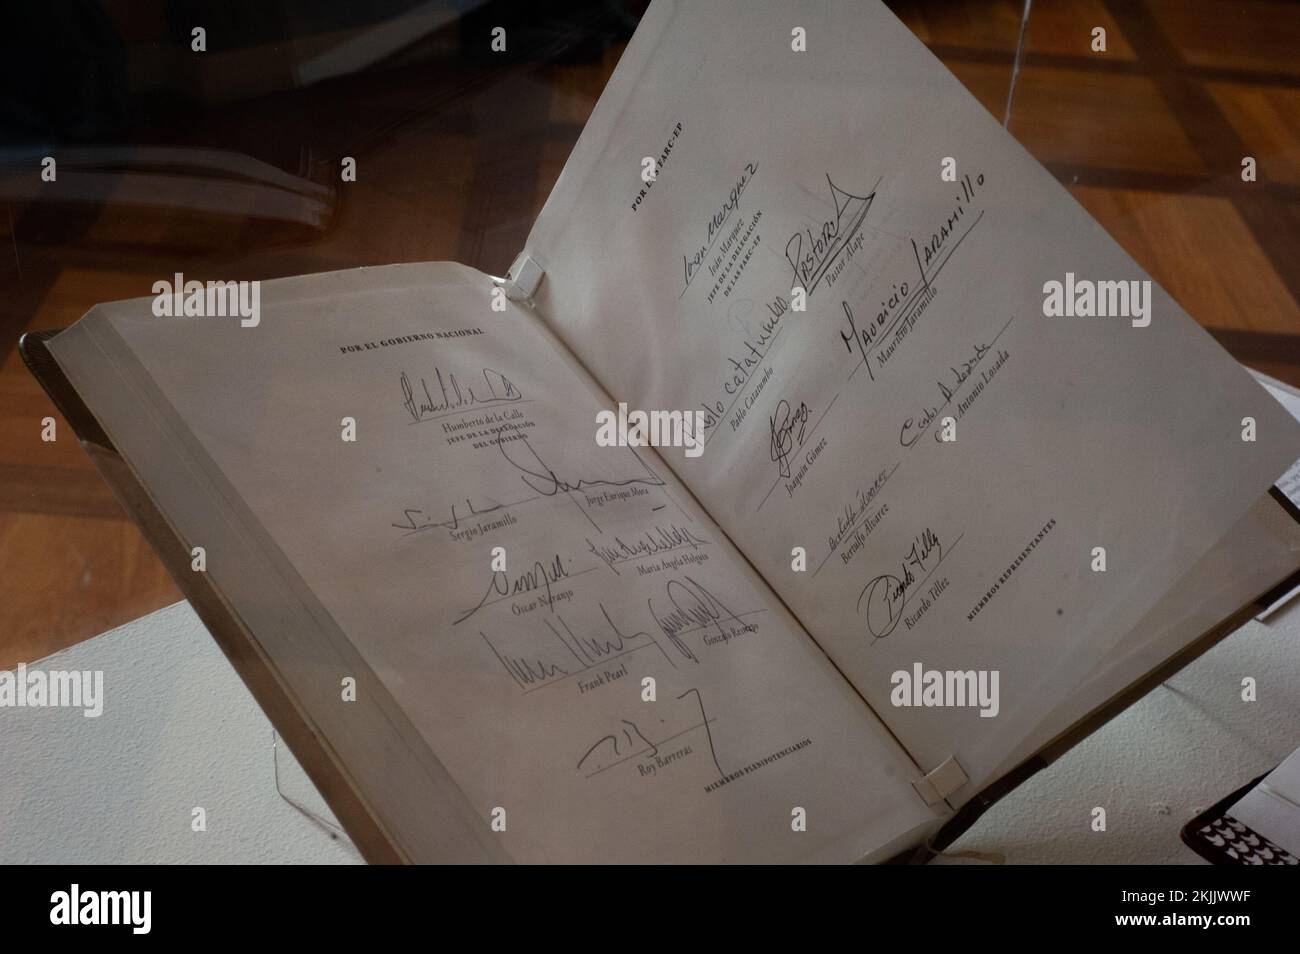 A view of the original peace agreement document during the sixth anniversary of the signing of Colombia's Peace Agreement between the Colombian government and former guerrilla group FARC-EP. Photo by: Chepa Beltran/Long Visual Press Credit: Long Visual Press/Alamy Live News Stock Photo